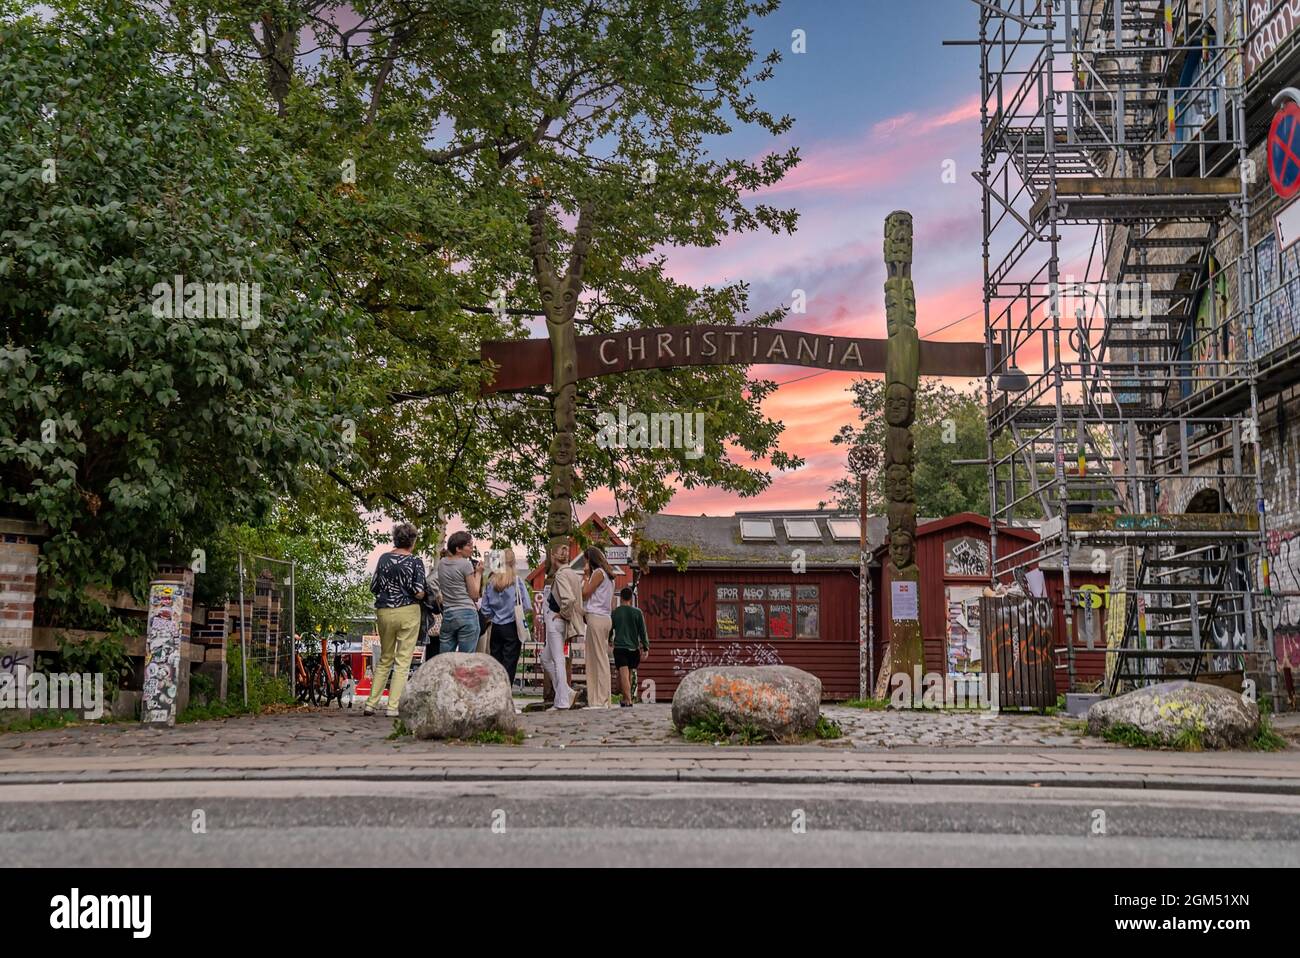 Sign located above the entrance to Christiania Stock Photo